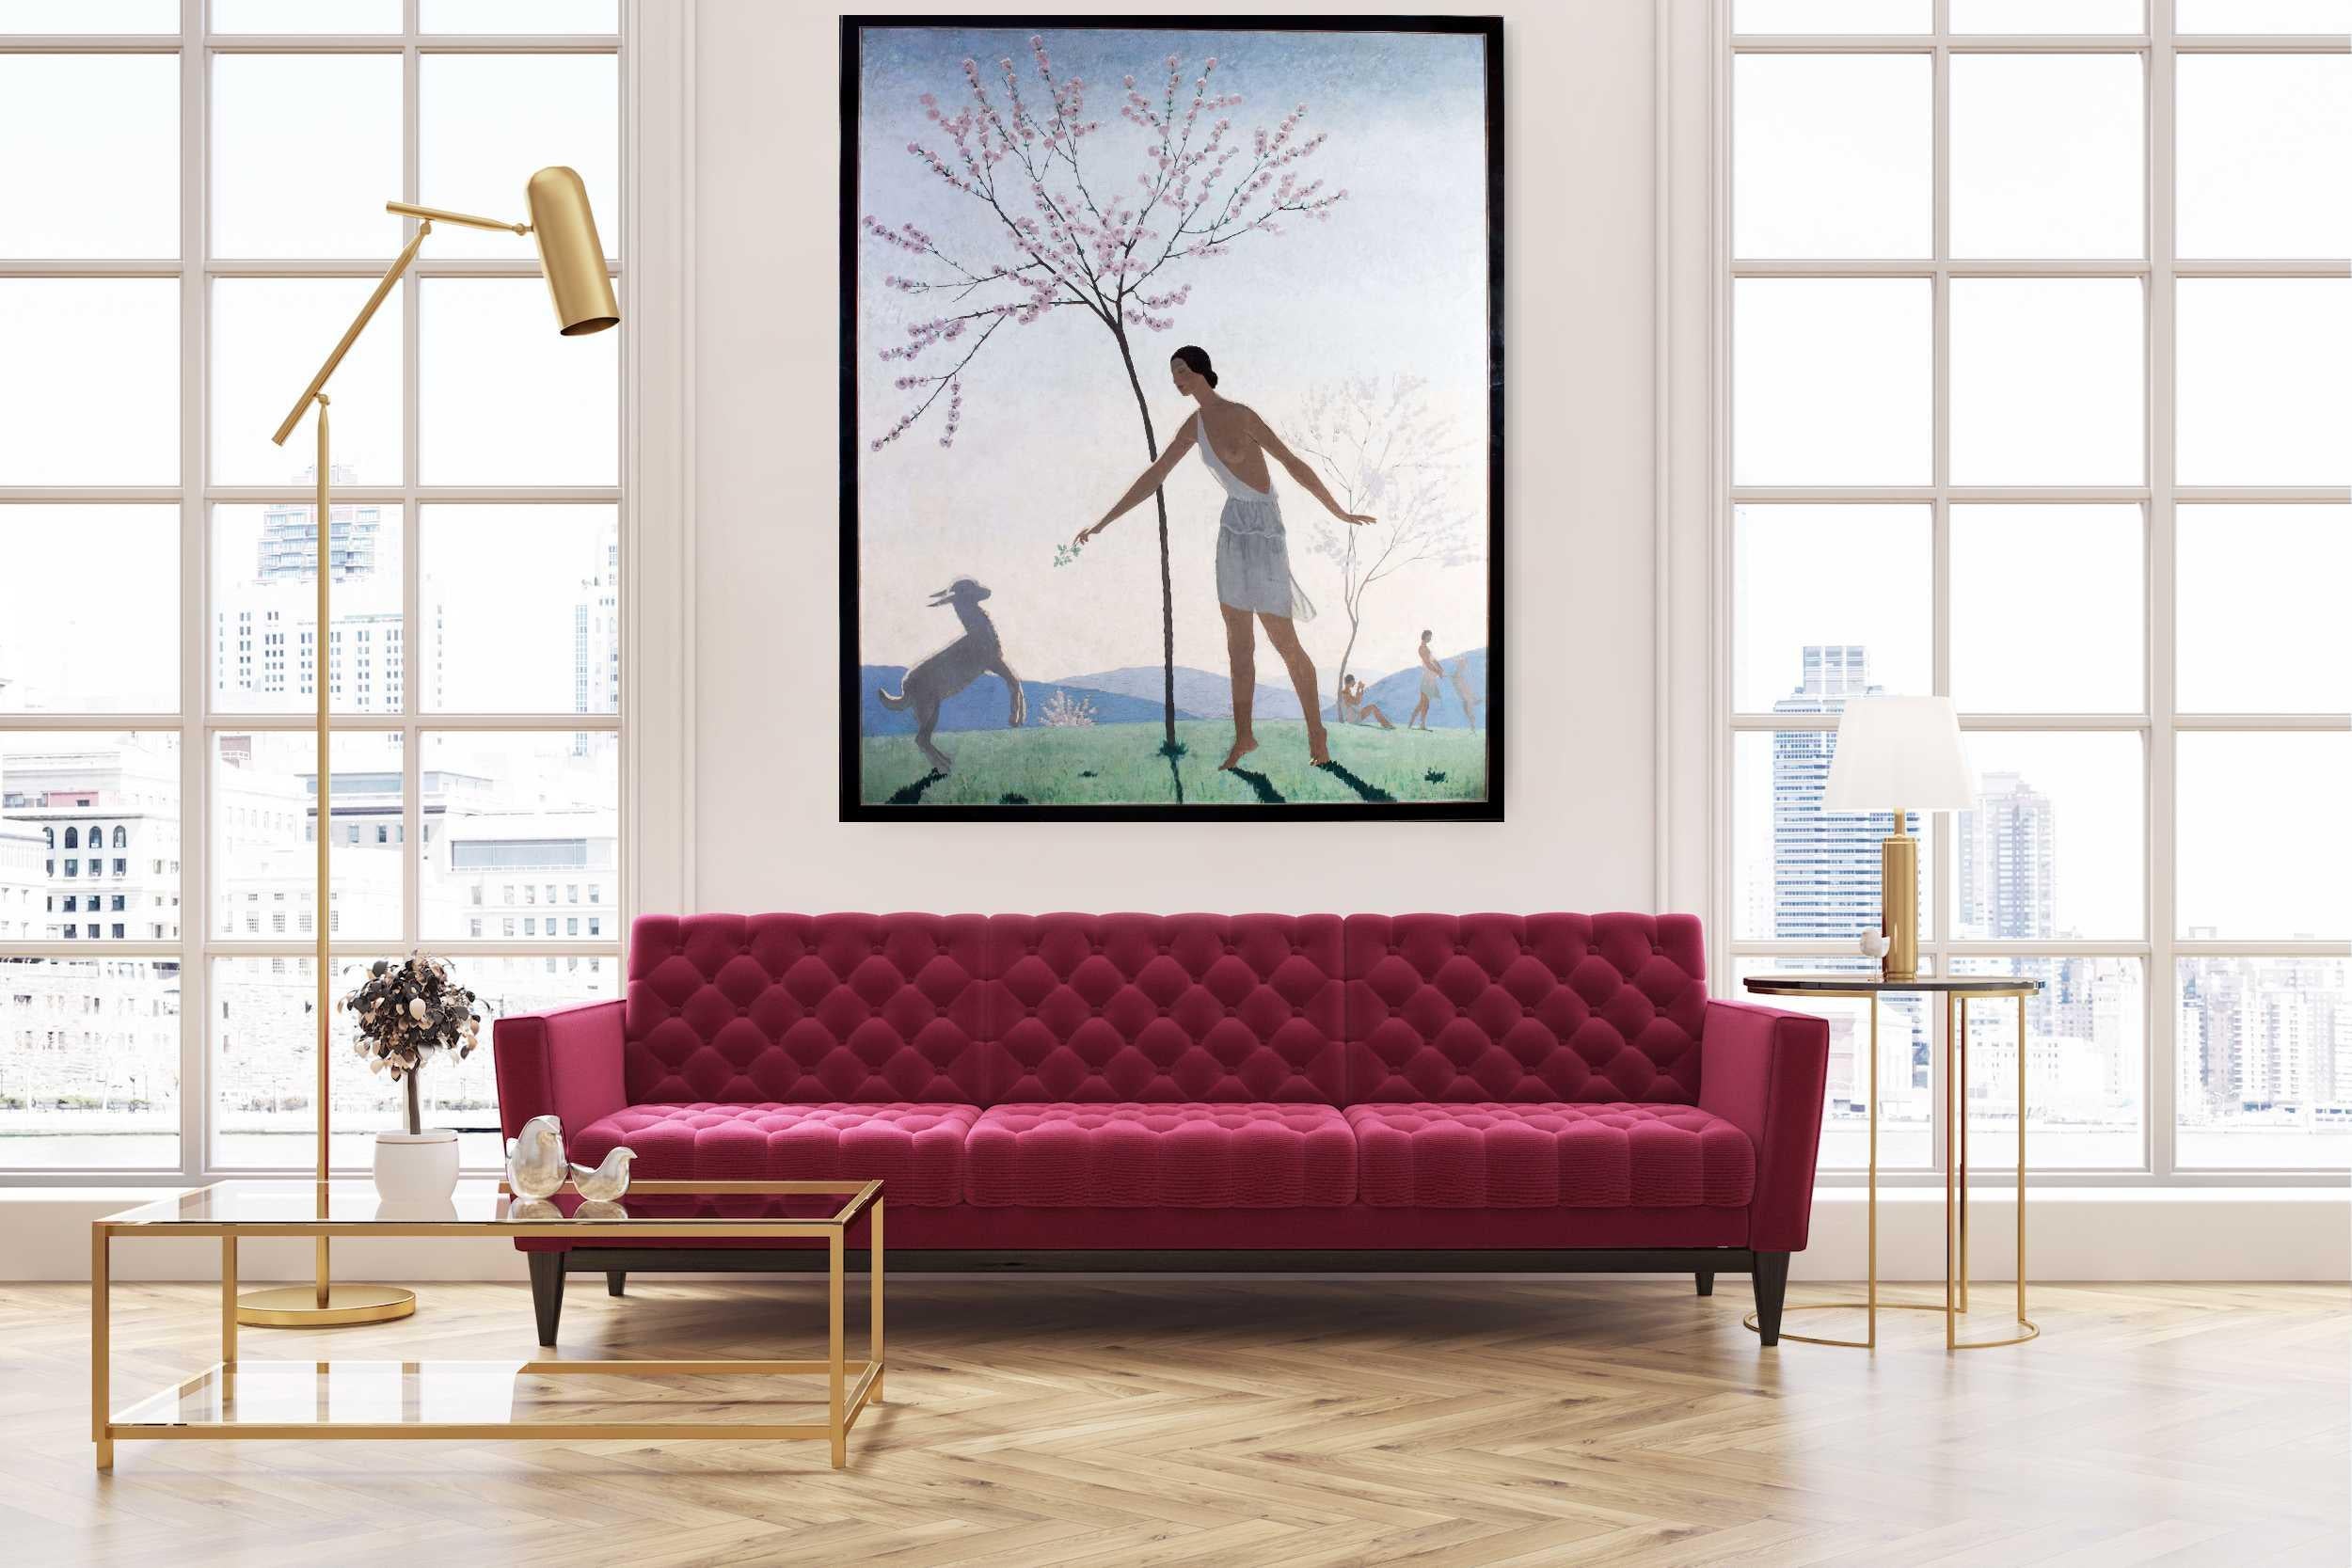 Stunning large original French art deco painting by fashion illustrator Marty - Painting by Andre-Edouard Marty